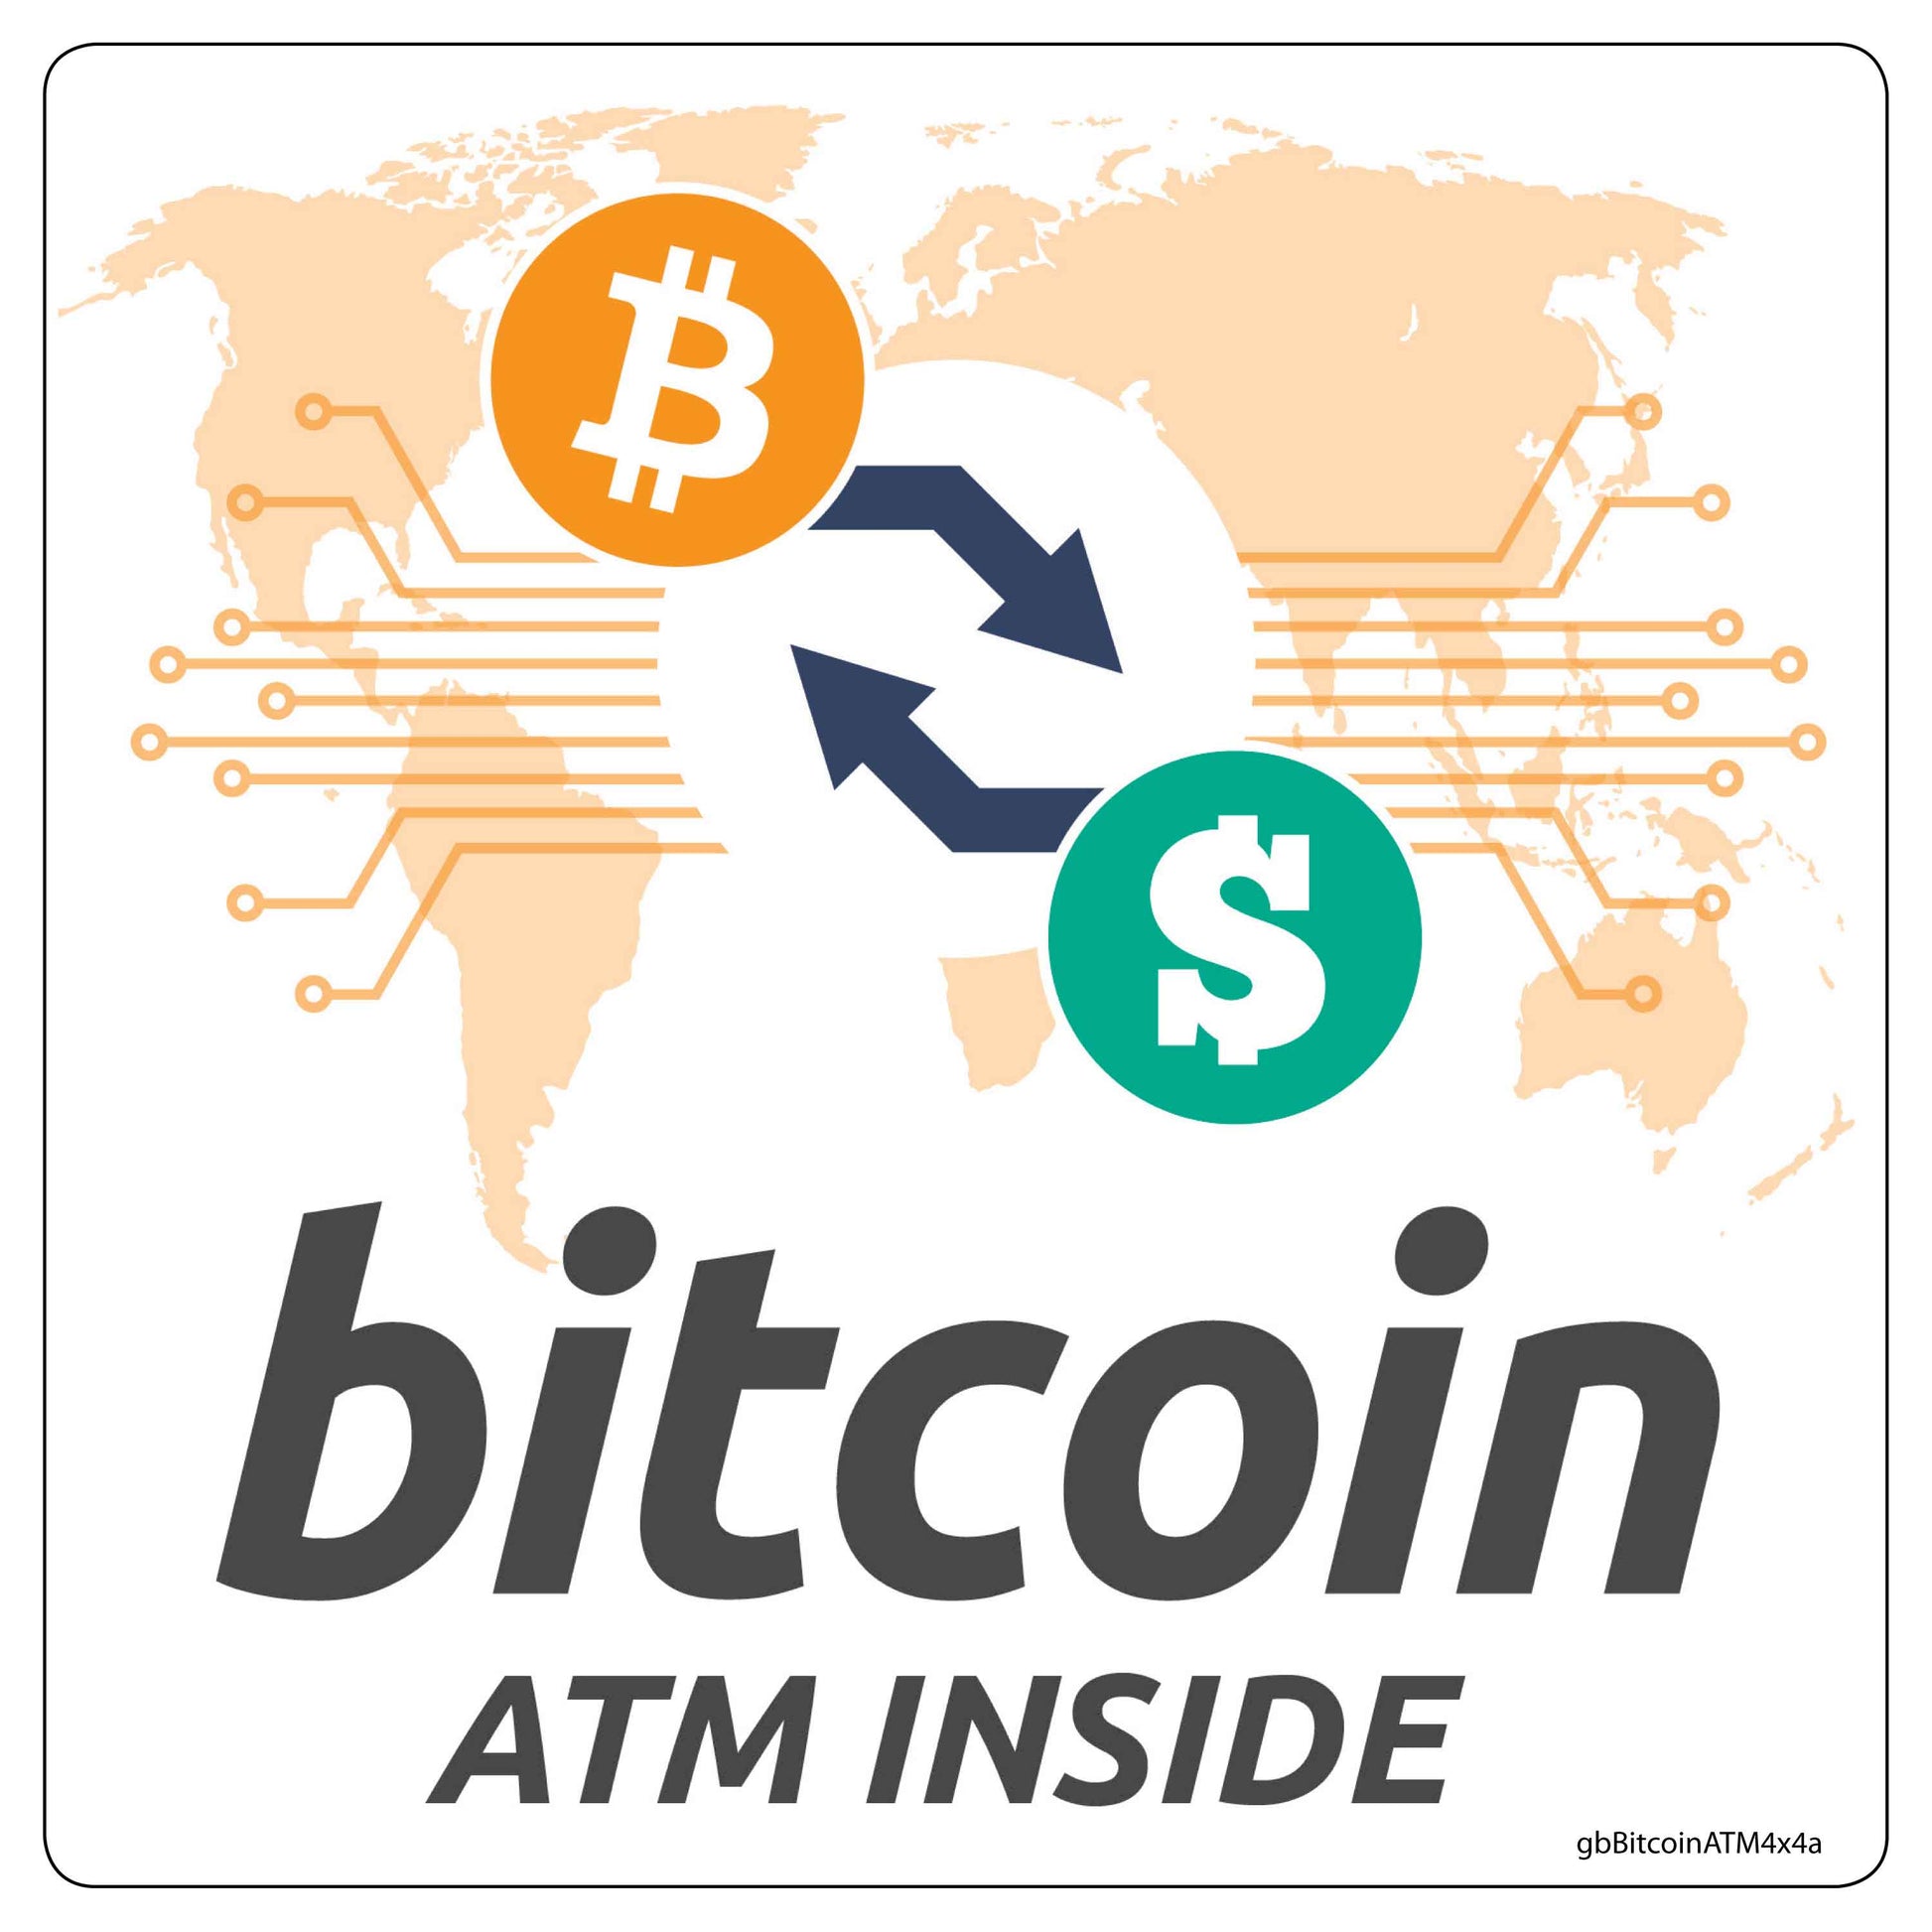 Bitcoin ATM Inside Decal with Globe. 4 inches by 4 inches in size.